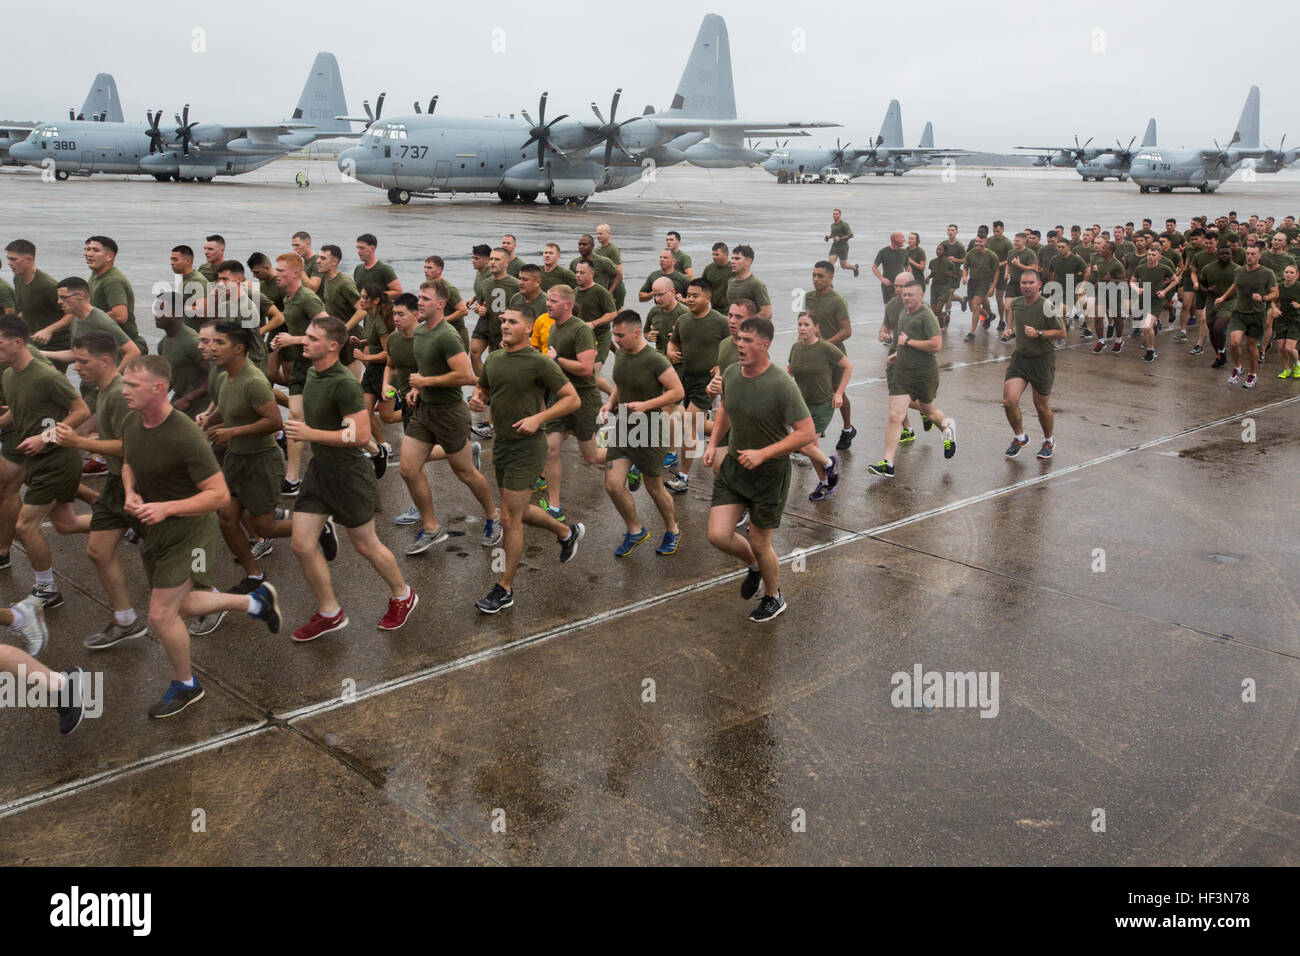 U.S. Marines and Sailors assigned to 2nd Marine Aircraft Wing participate in a formation run on Marine Corps Air Station Cherry Point, N.C., Nov. 9, 2015. The run was conducted in celebration of the Marine Corps' 240th Birthday. (U.S. Marine Corps photo by Lance Cpl. Jered T. Stone/Released) 2d MAW Birthday Run 151109-M-WP334-102 Stock Photo